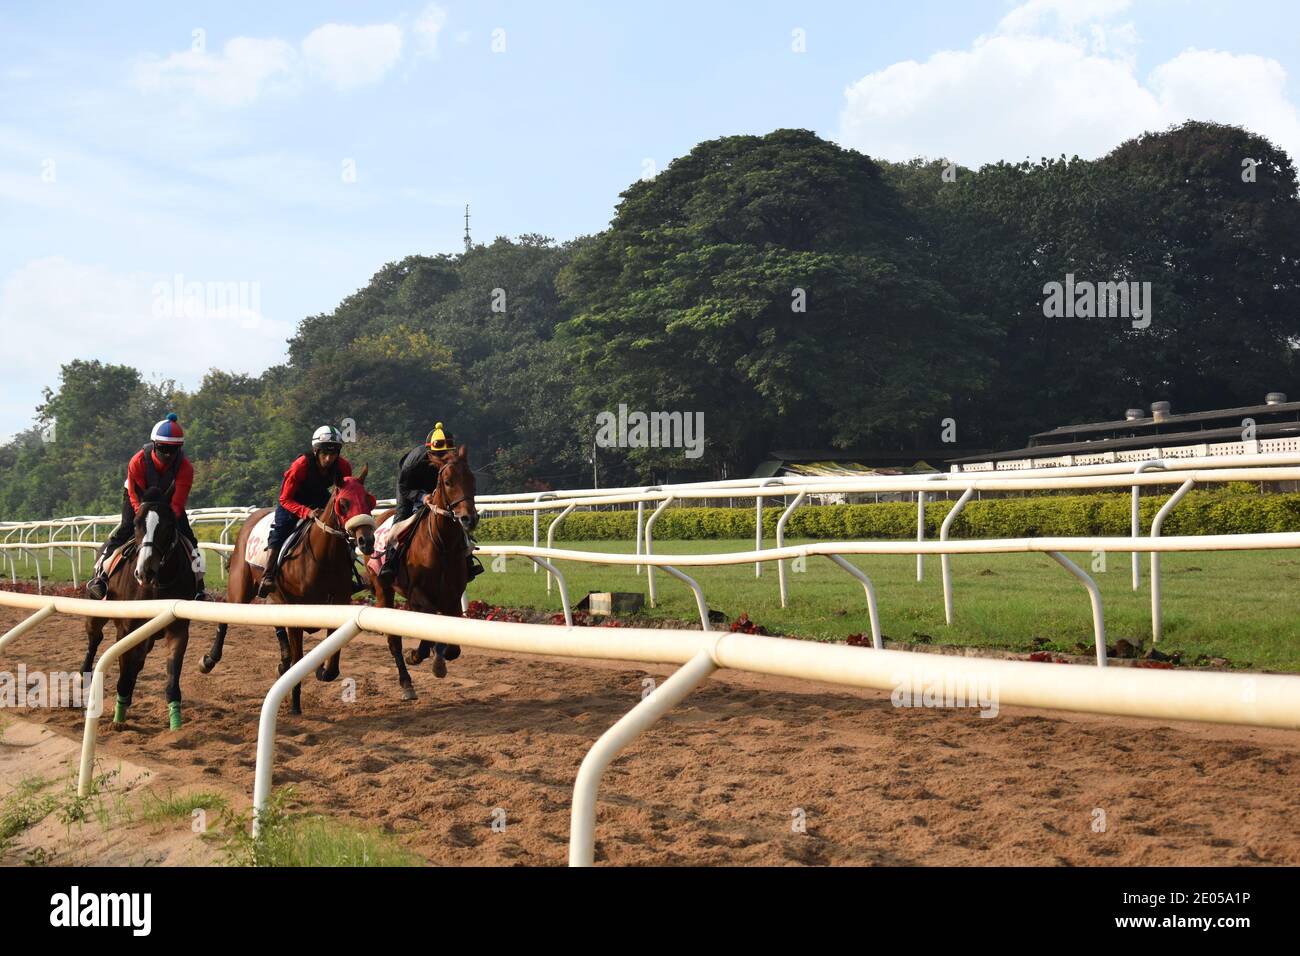 Pferderennen im 'Race Club RWITC Stadium' des Royal Western India Turf Club Limited, Pune Race Course Camp, Stockfoto